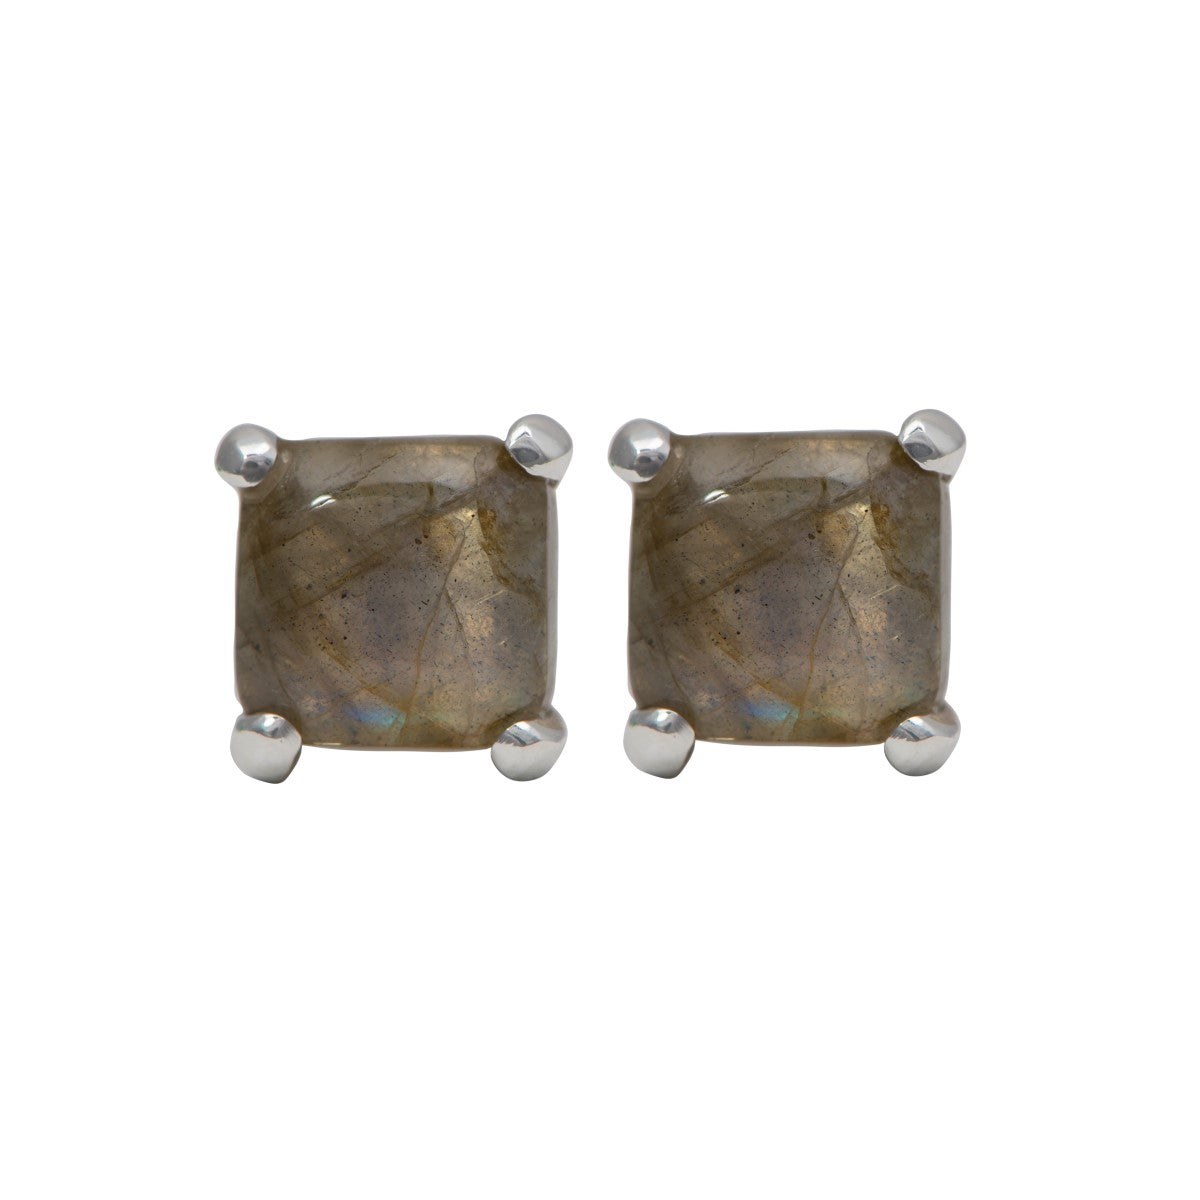 Square Cabochon Labradorite Stud Earrings in Sterling Silver